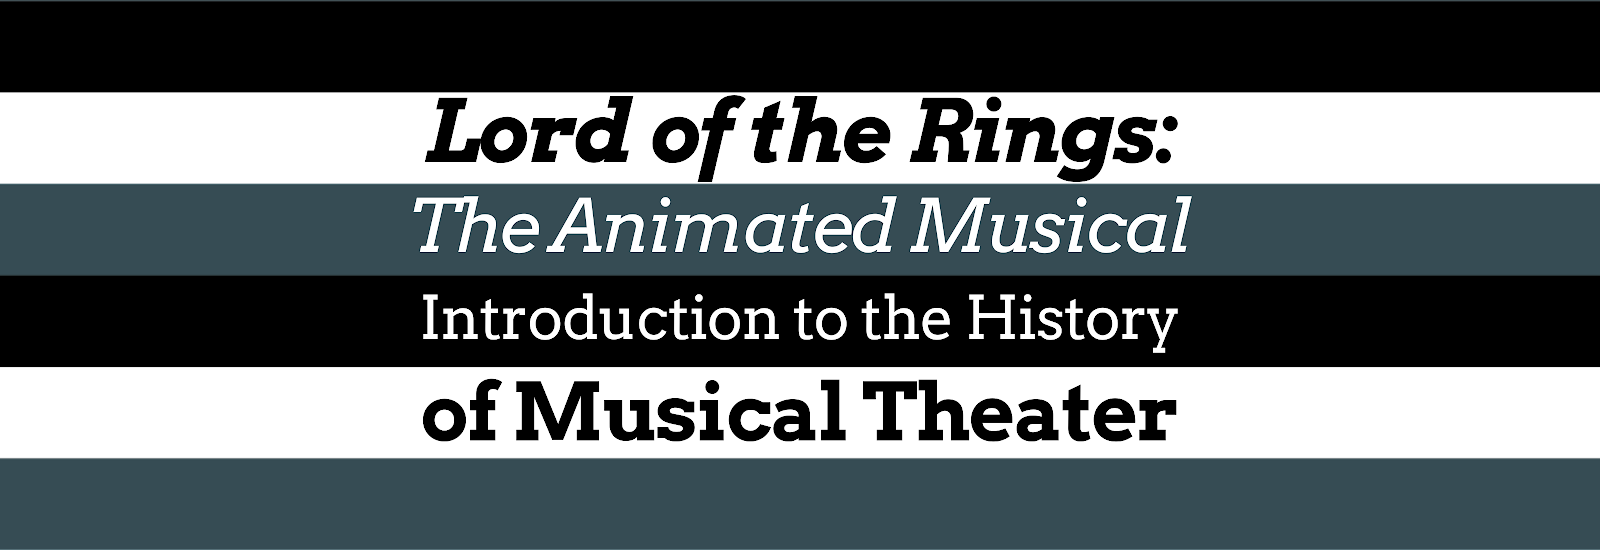 A black, white, and dark blue striped header image with the text Lord of the Rings: The Animated Musical Introduction to the History of Musical Theater